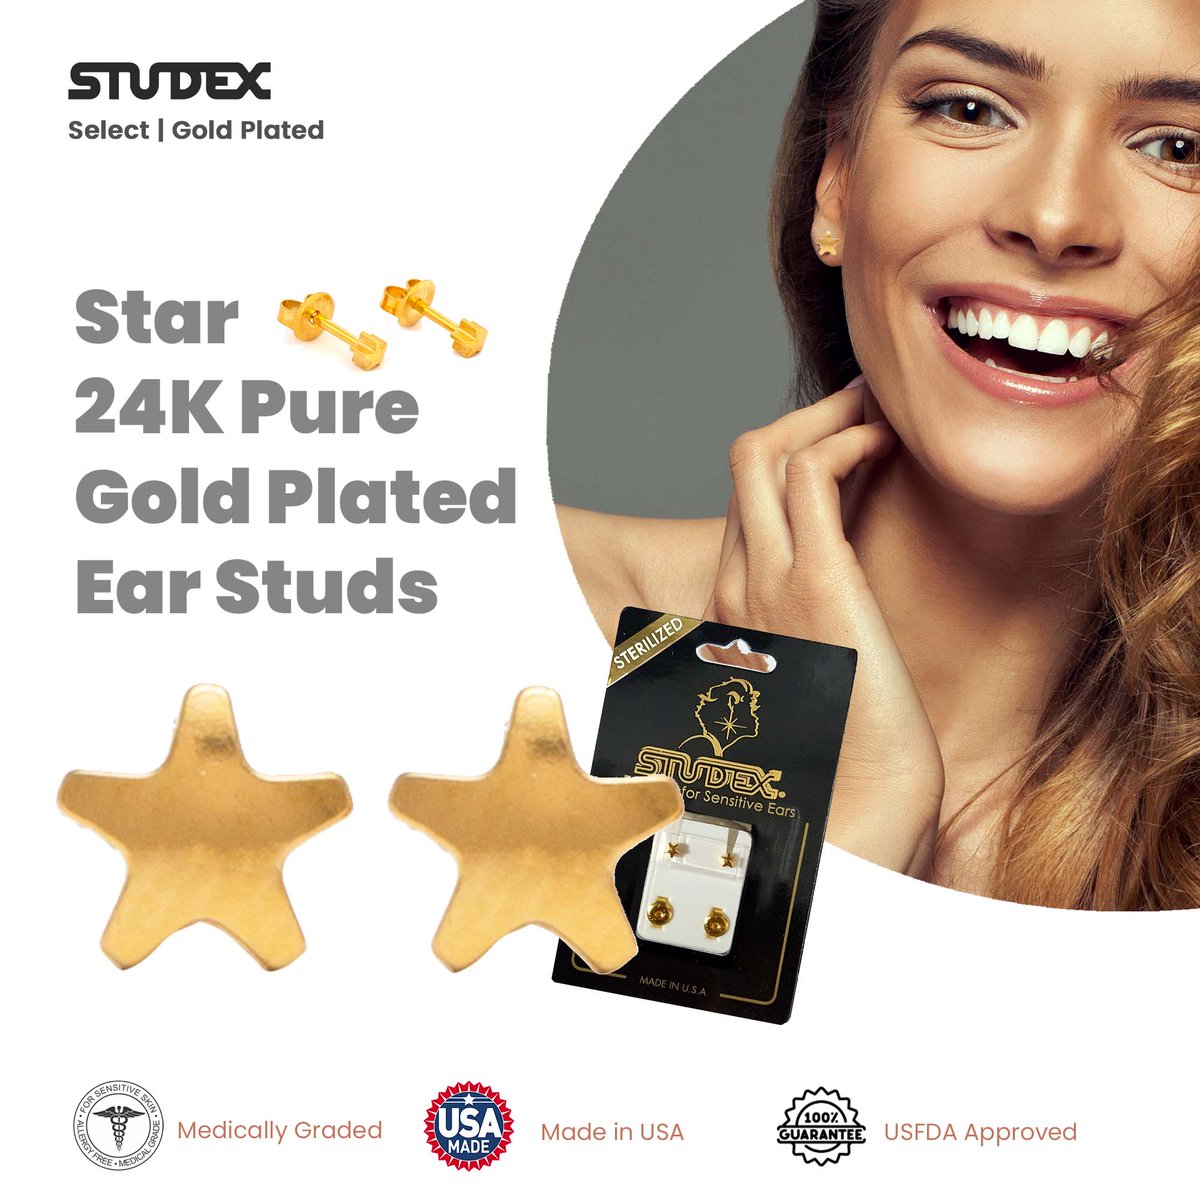 Embellish this beautiful Star 24K Pure Gold Plated Ear Studs | MADE IN USA | Ideal for every day wear
Shop Now: daraz.pk/products/3mm-s…
#Studex #StudexPakistan #EarStuds #MadeInUSA #AllergyFree #FashionEarrings #Earringsoftheday #Earringsoftheweek #BeTrendy #BeStudex #TrendSetter